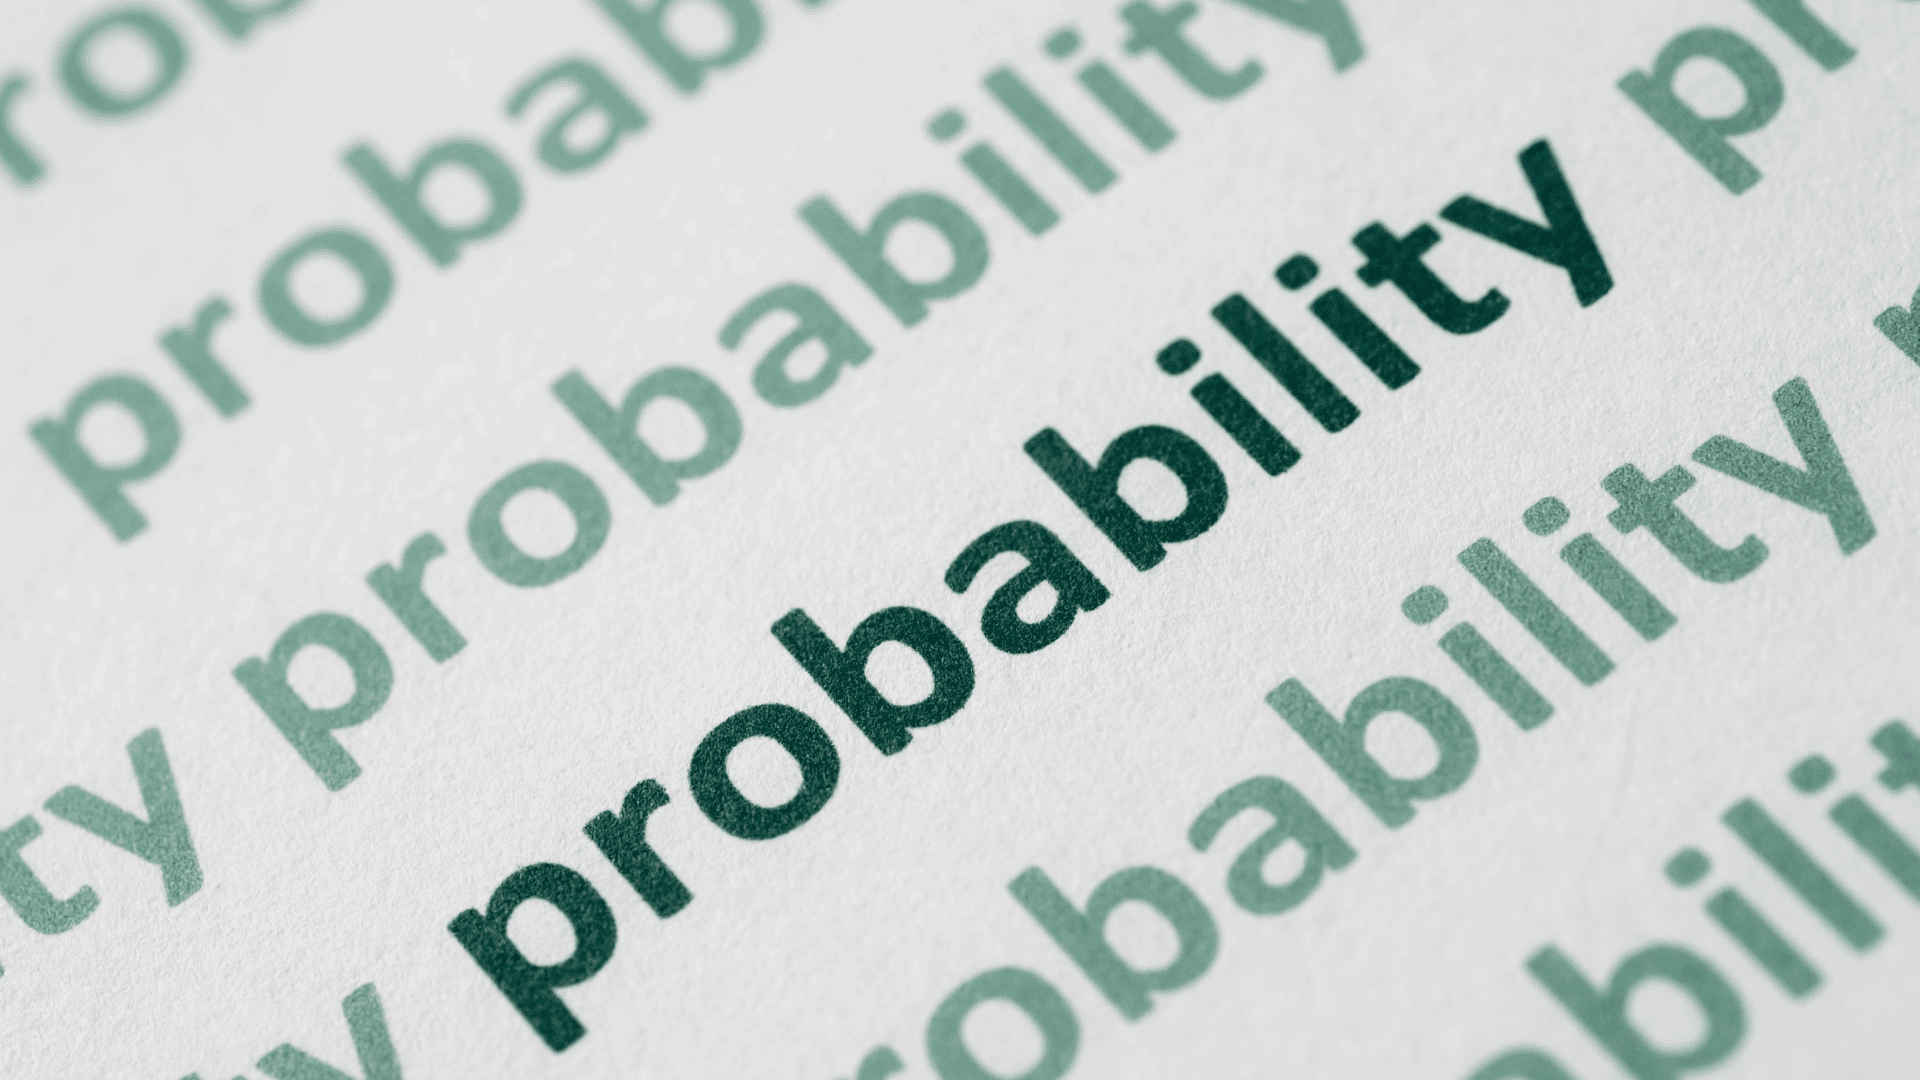 The word 'probability' printed on a page many times. Section 10 probabillity reference